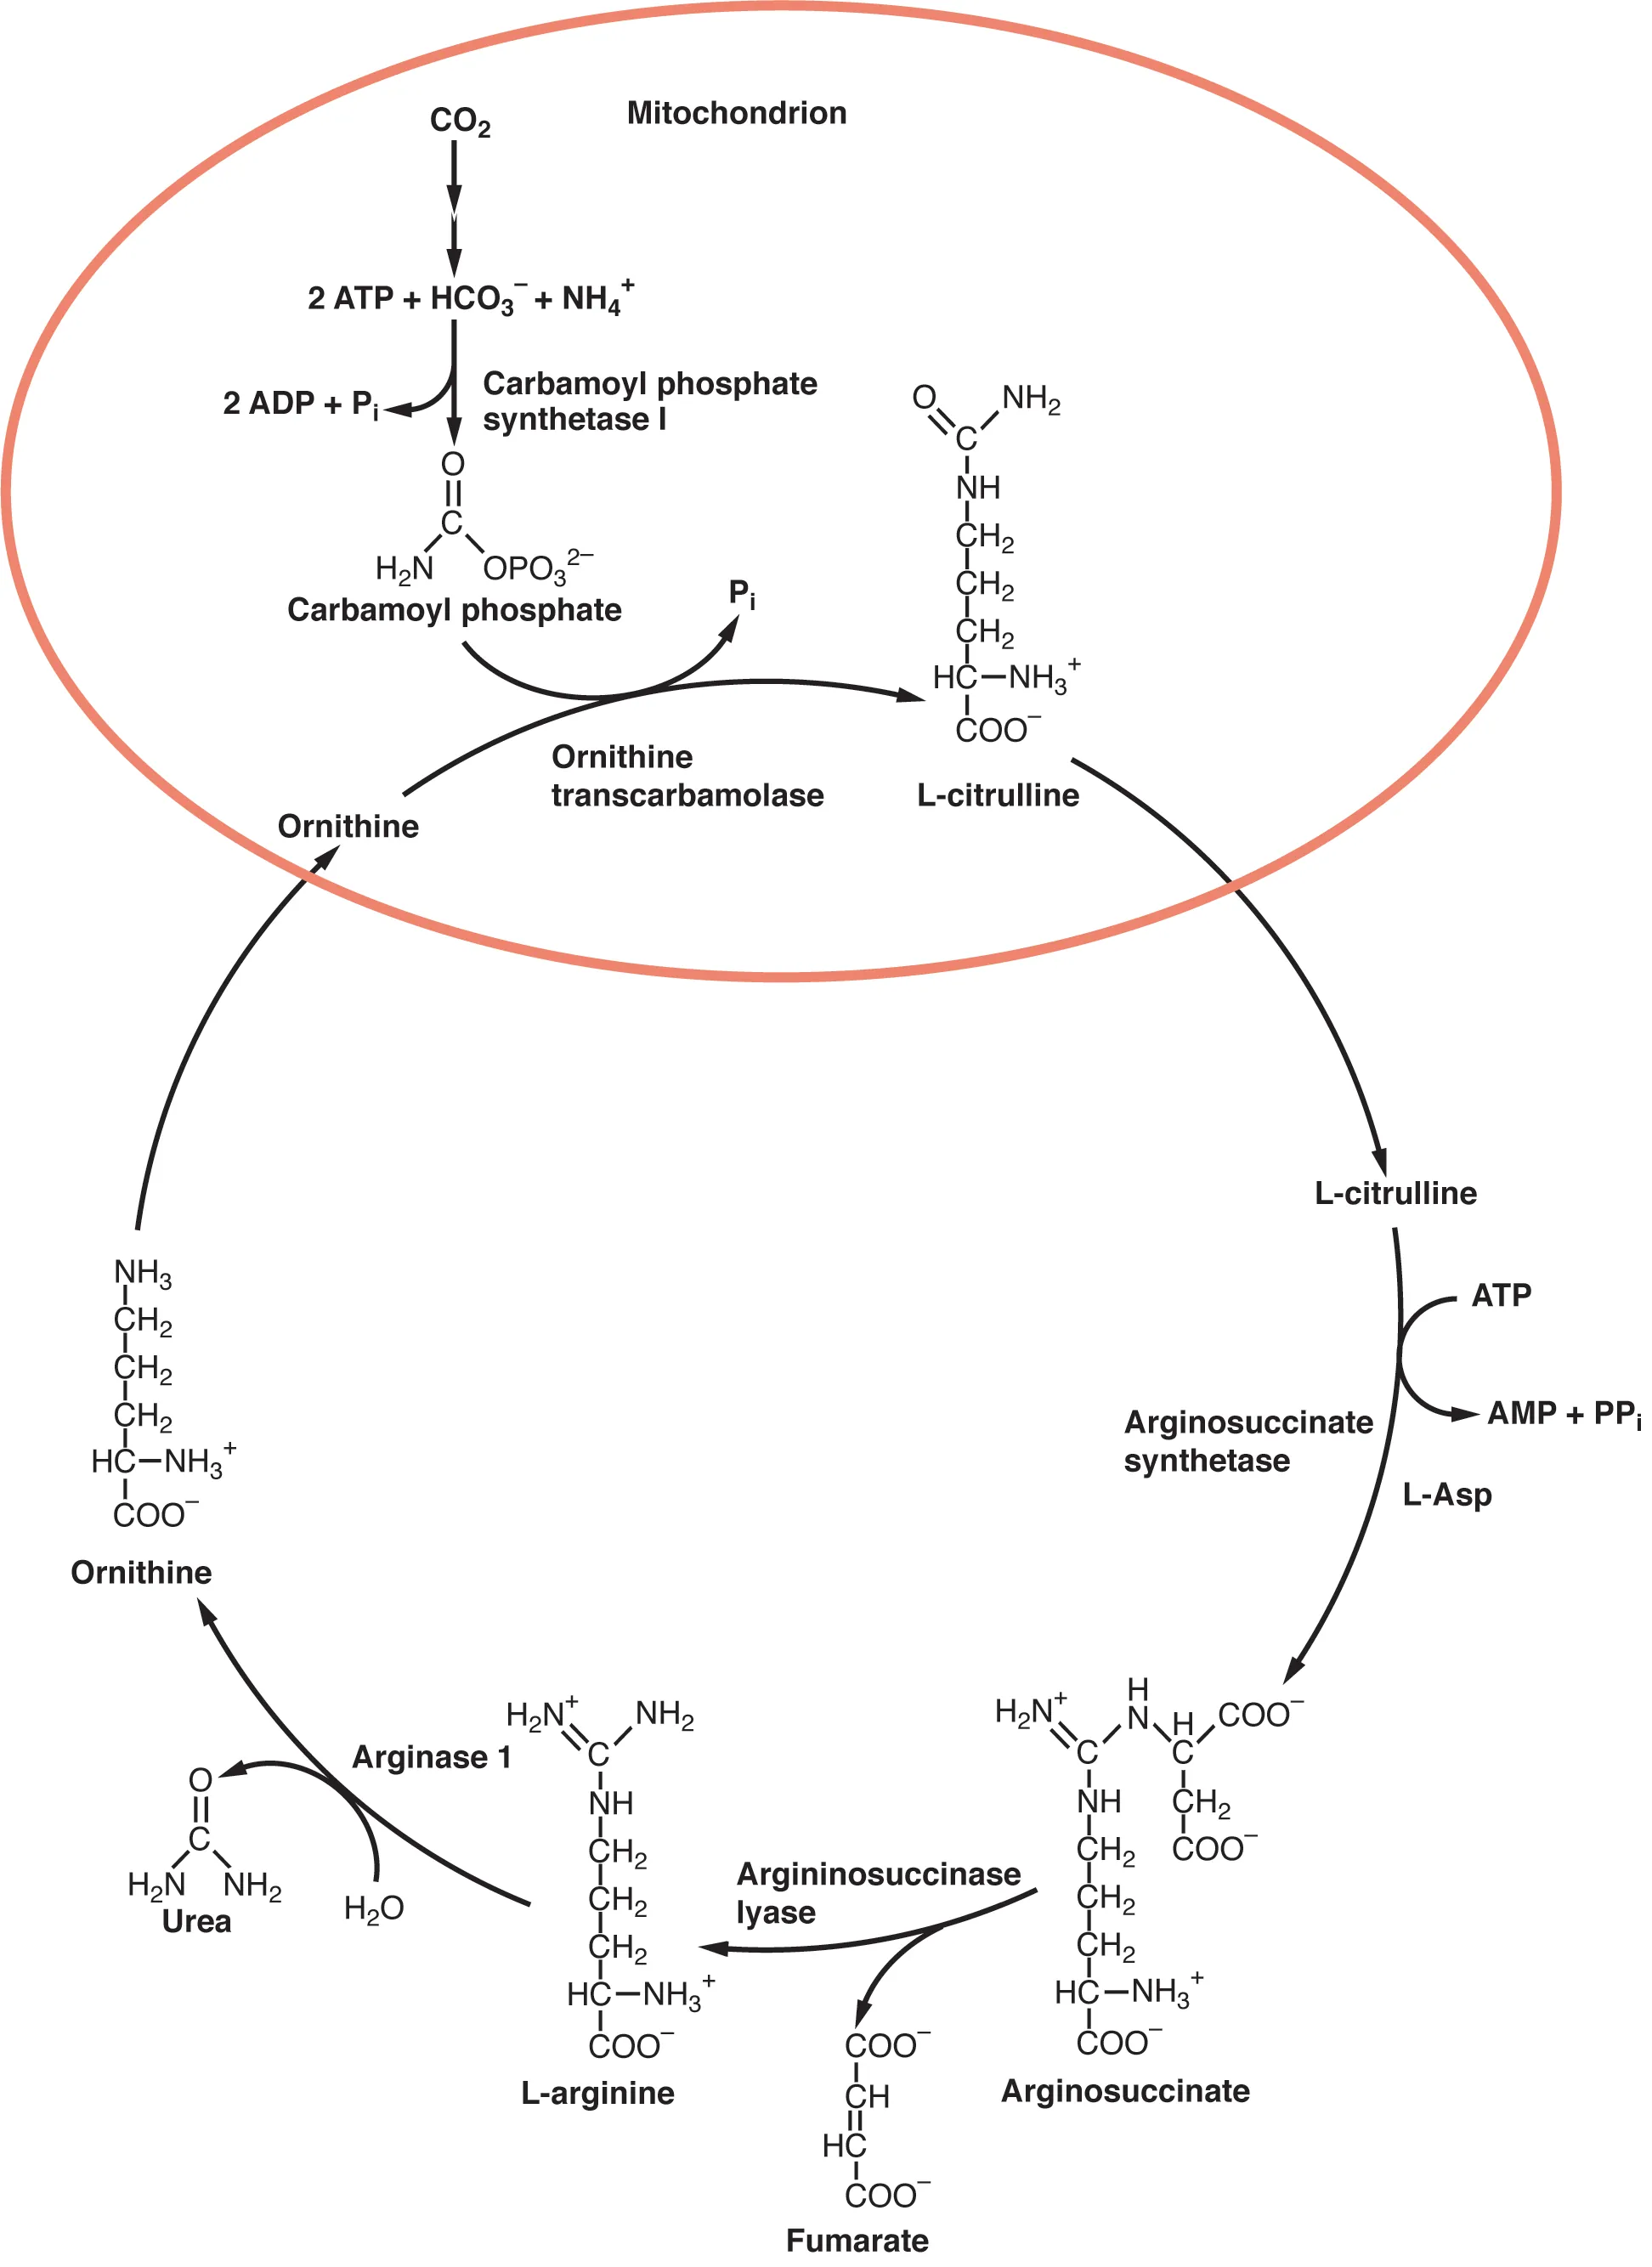 This image shows the reactions of the urea cycle and the organelles in which they take place.